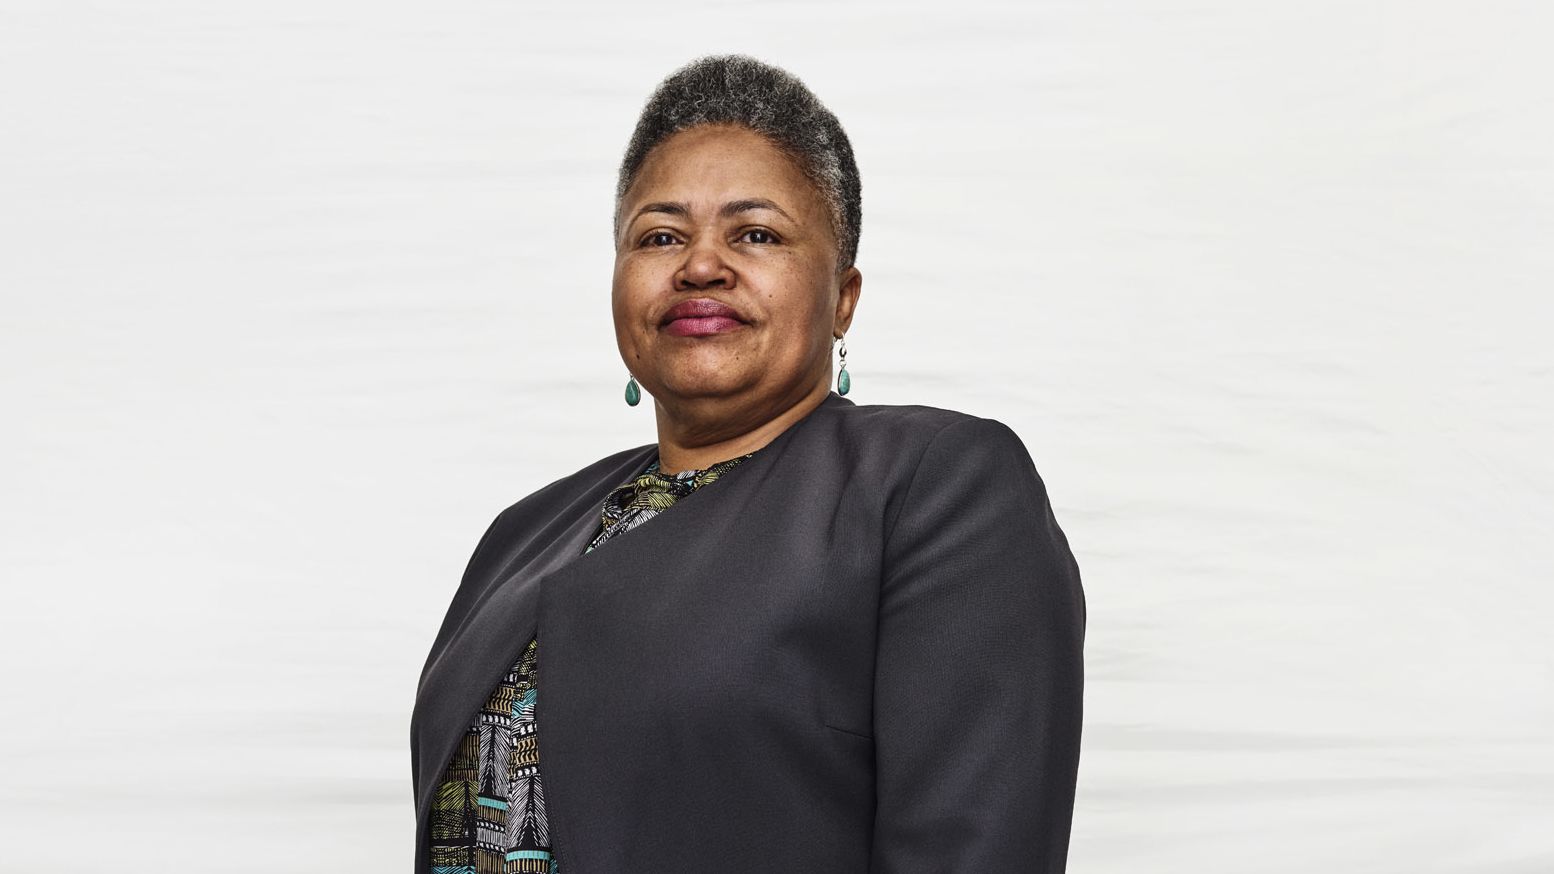 Monica Lewis-Patrick, also known as "The Water Warrior," is president  of "We, The People of Detroit" a civic group fighting for clean, affordable water.